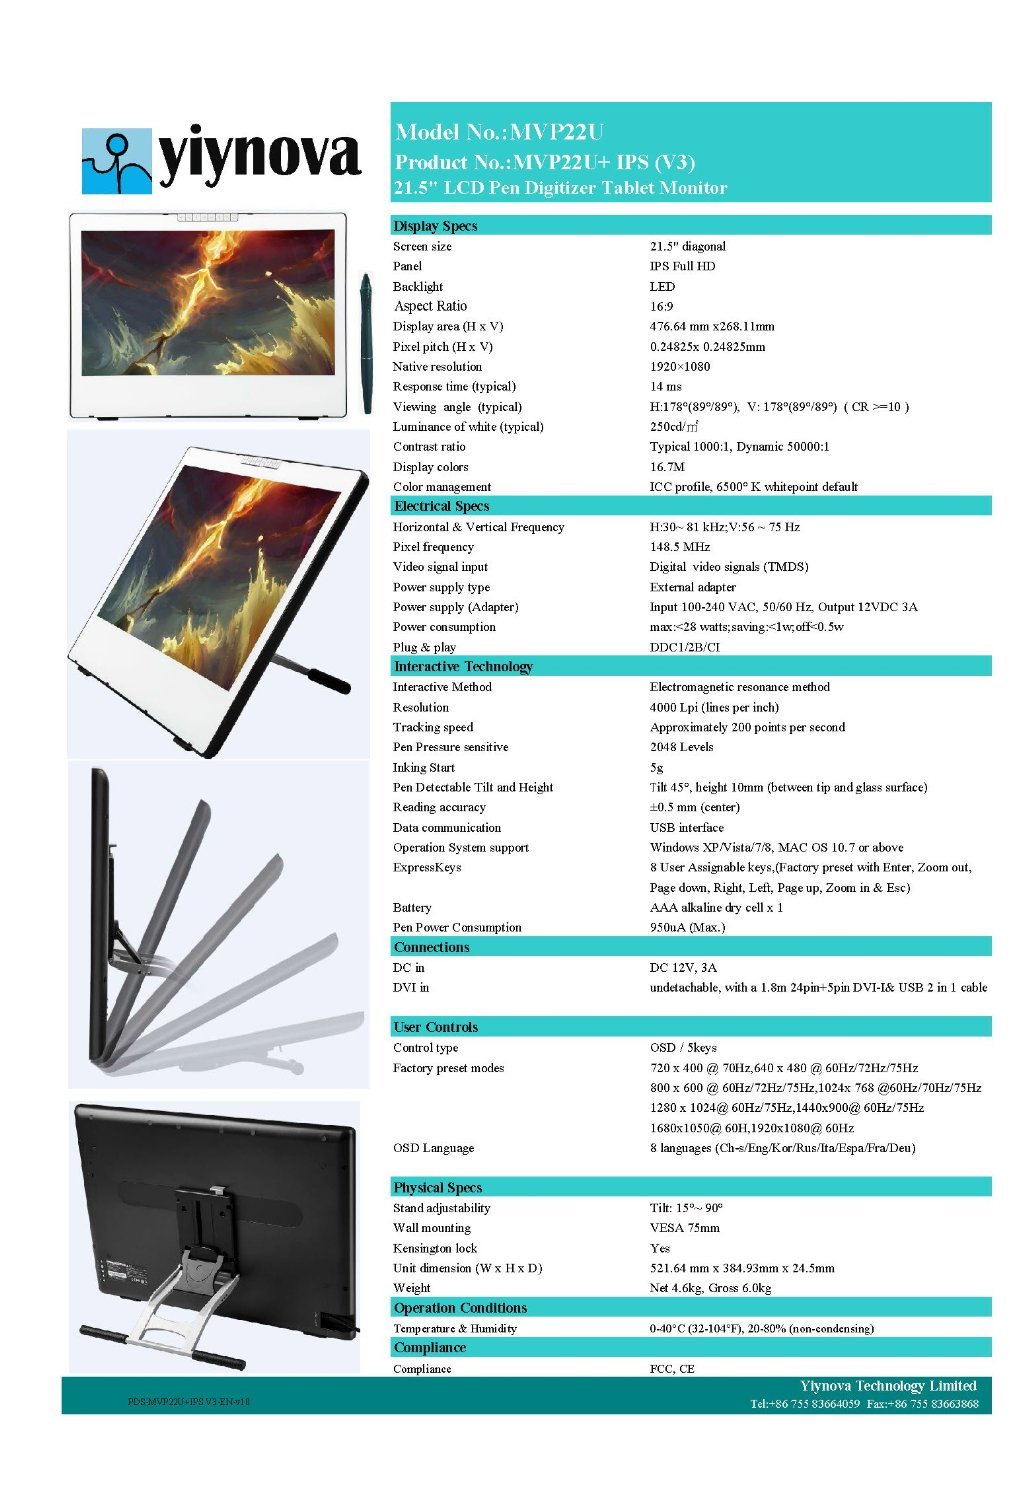 Free Download: Wacom Intuos Pro Tablet Driver 6.3.11w3 For Mac